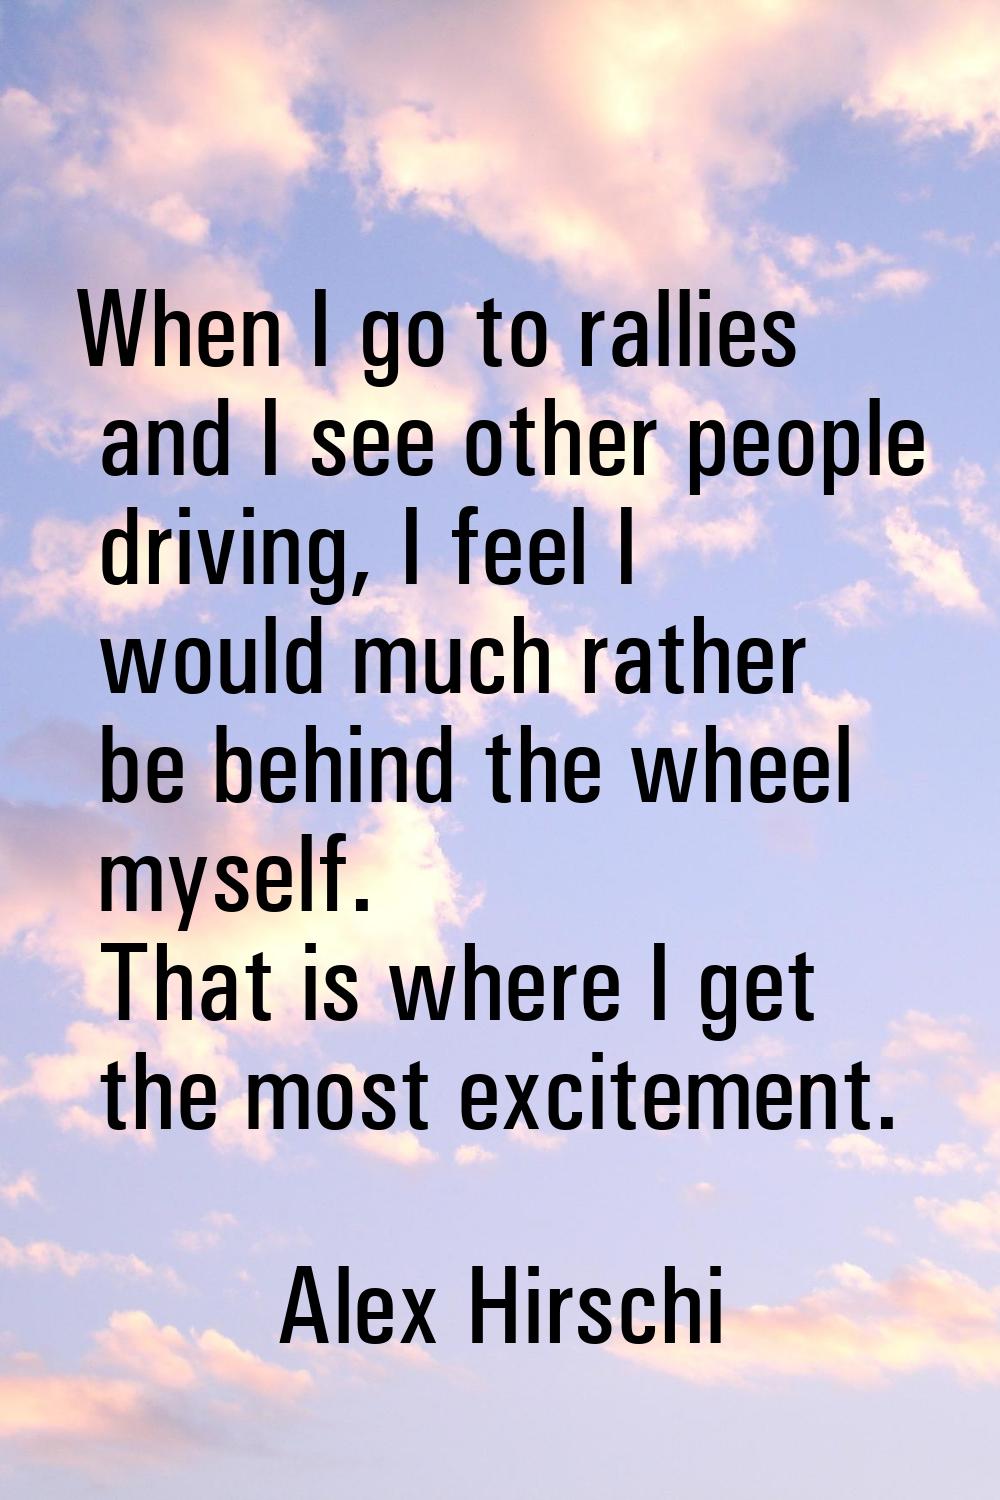 When I go to rallies and I see other people driving, I feel I would much rather be behind the wheel